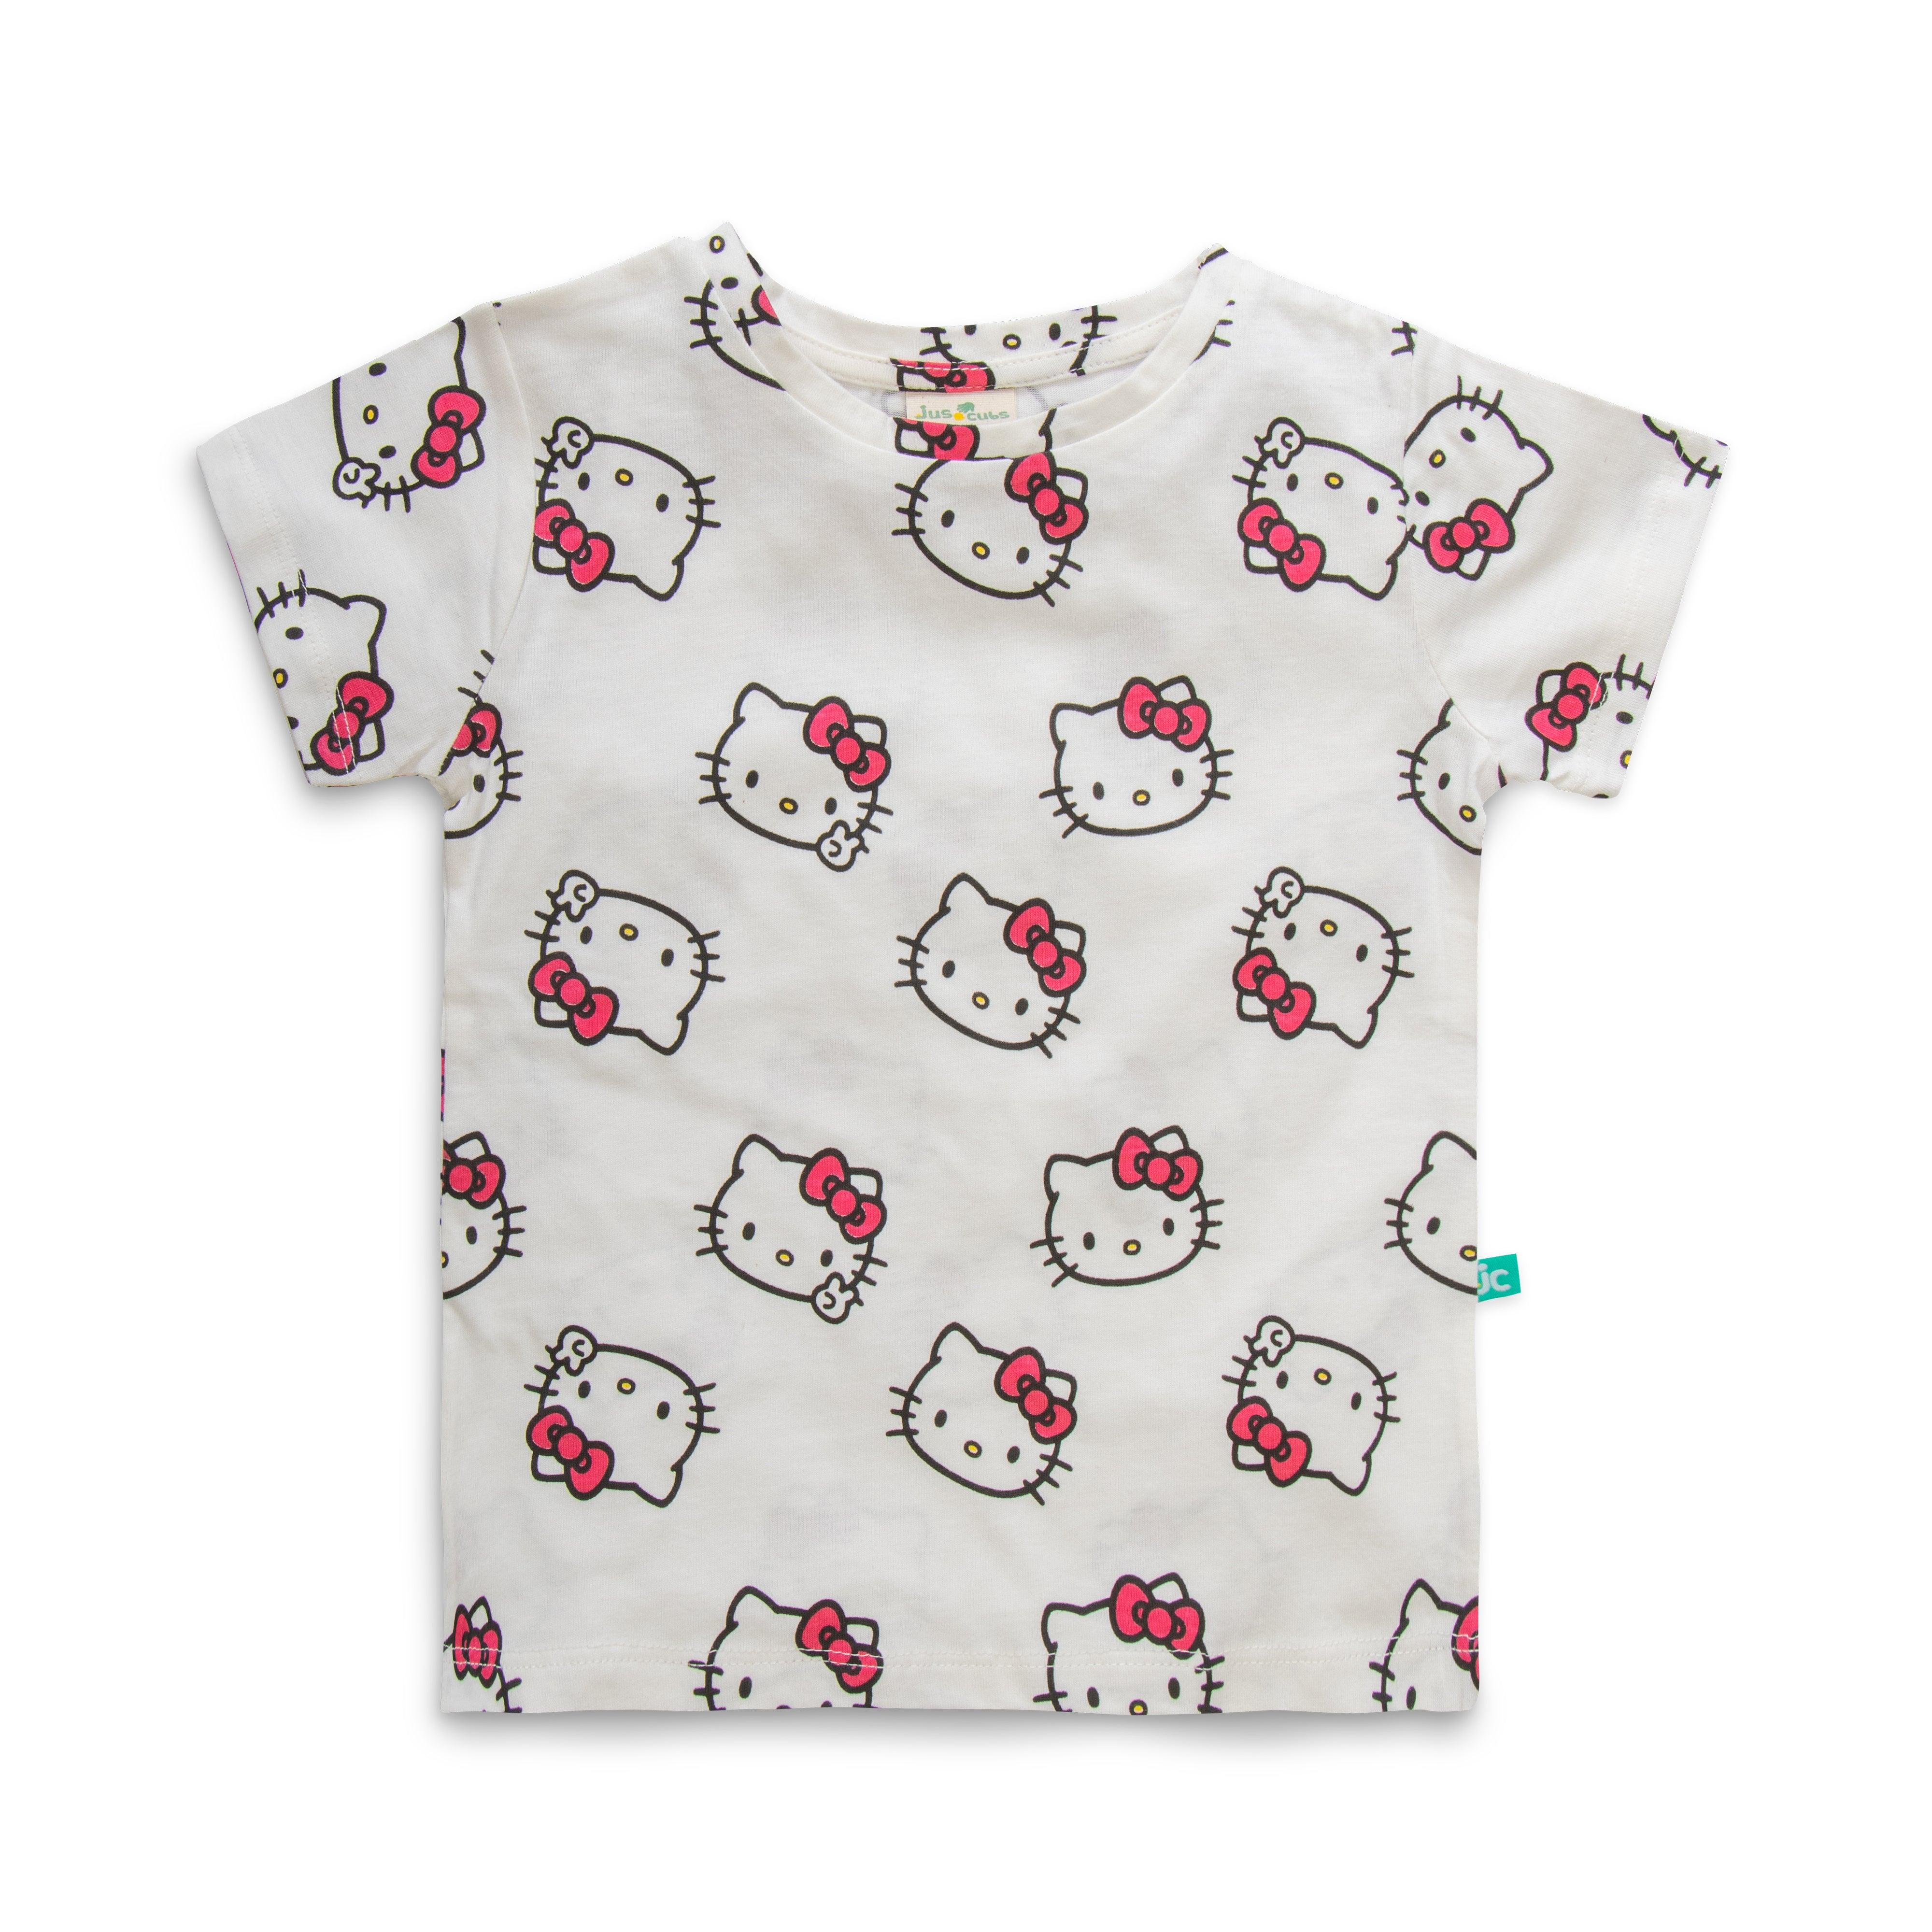 Hello Kitty Half Sleeve Printed Combo Tee - Pink & White - Juscubs